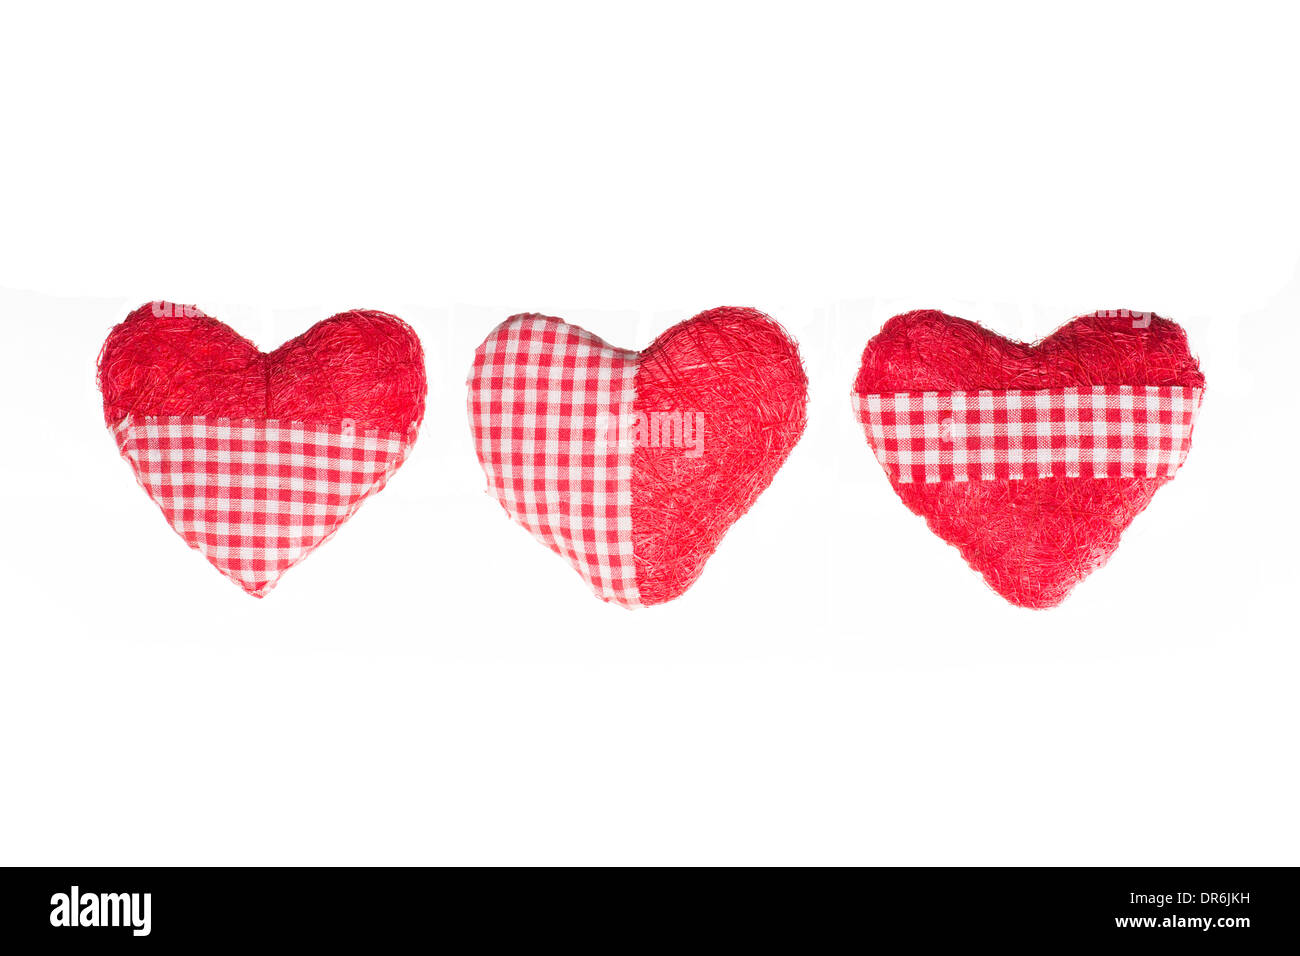 Three Heart Shaped Pillows Isolated On A White Studio Background Stock Photo